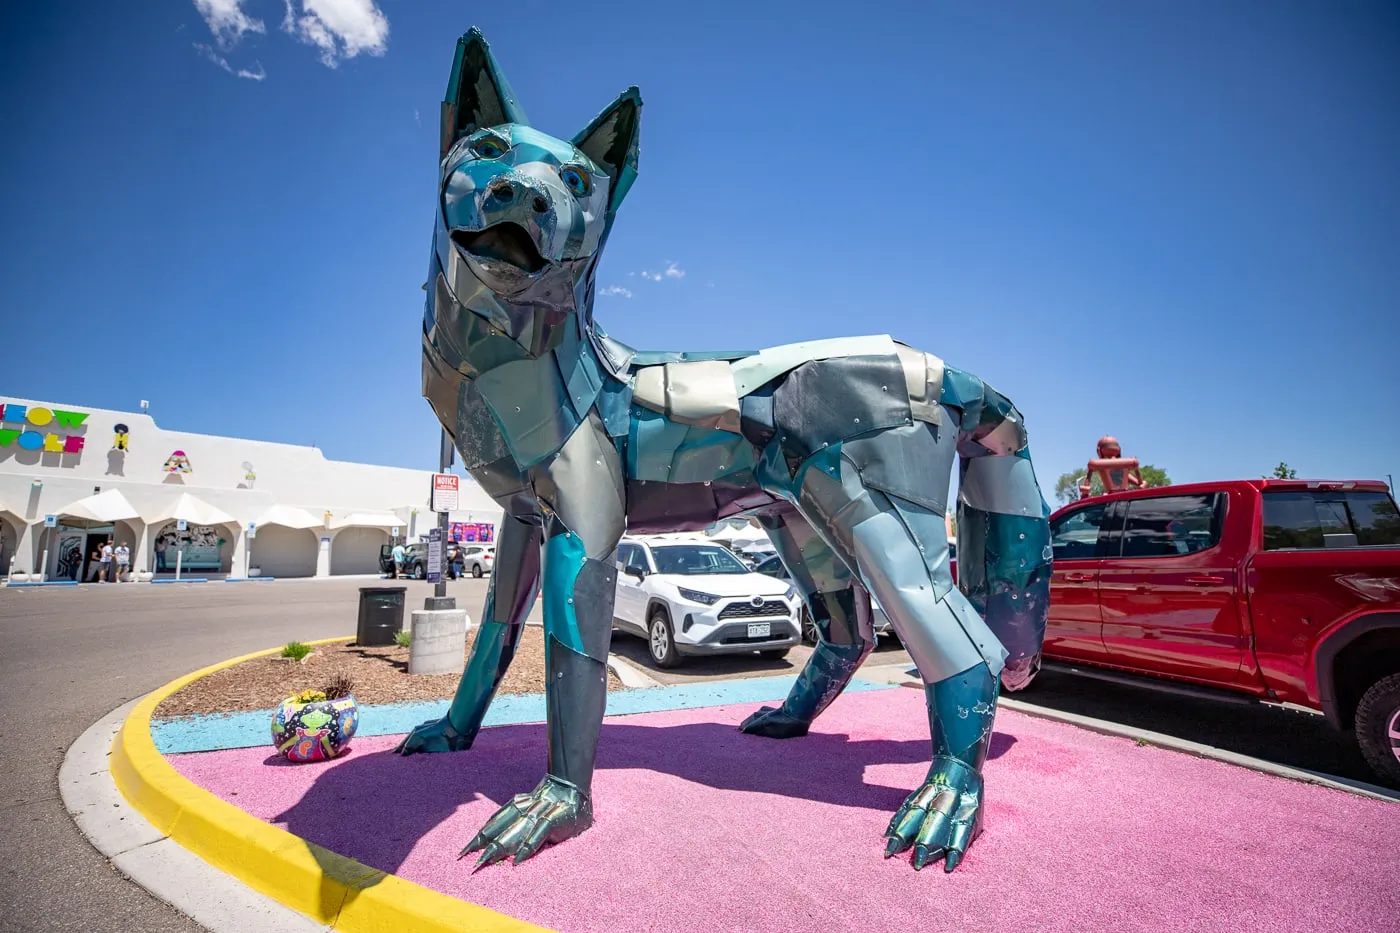 Green Coyote Giant Coyote Statue at Meow Wolf in Santa Fe New Mexico